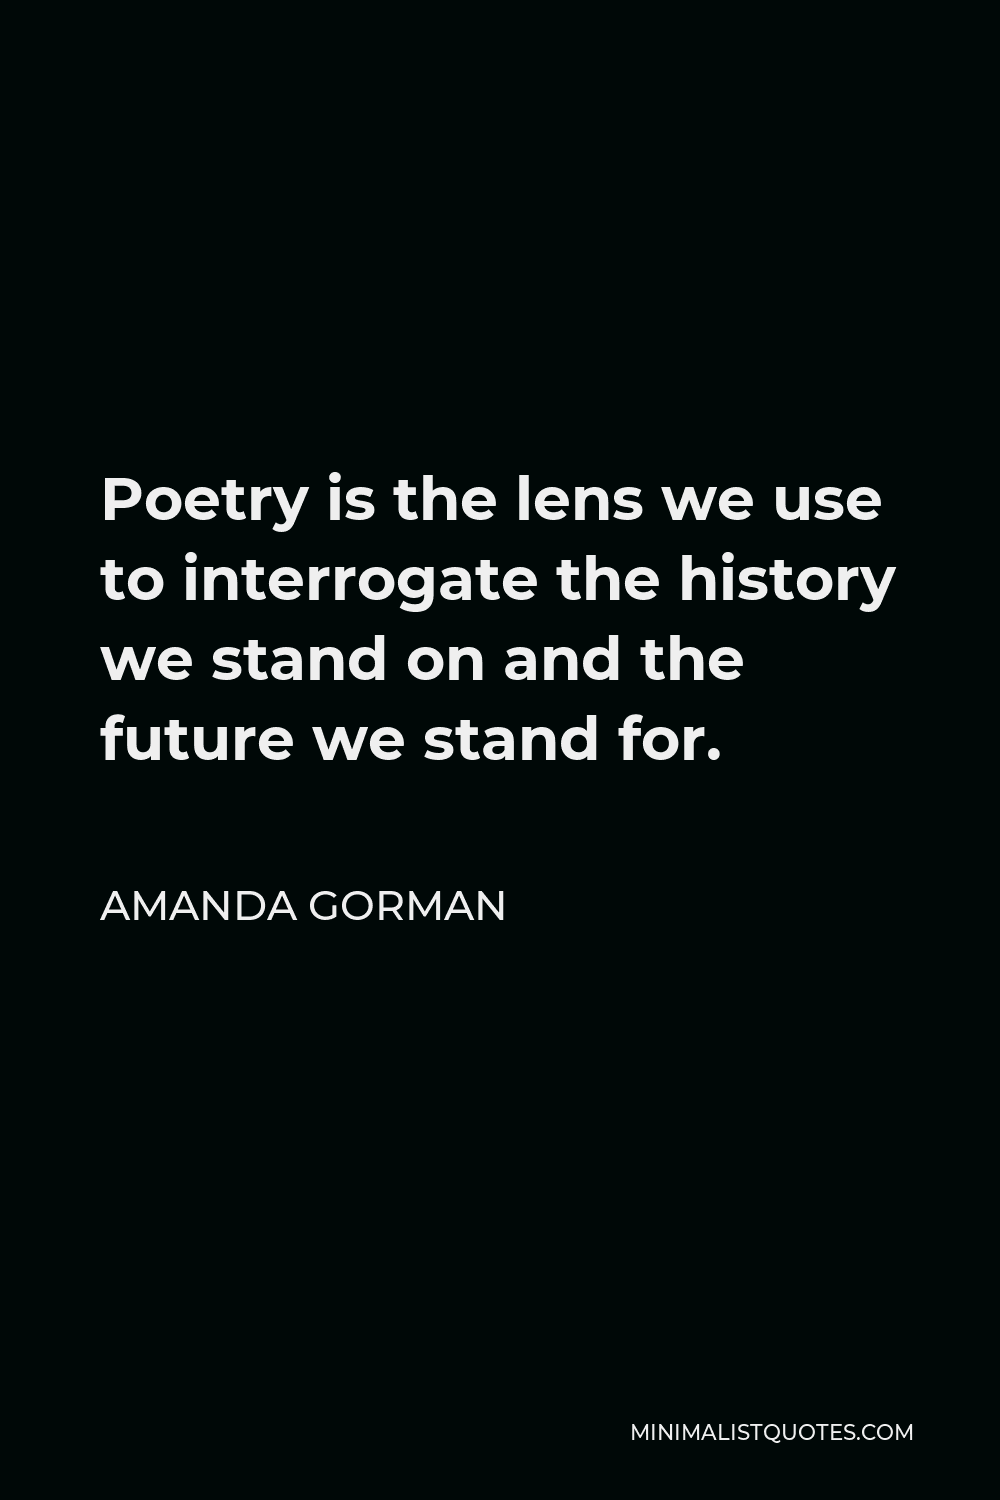 Amanda Gorman Quote - Poetry is the lens we use to interrogate the history we stand on and the future we stand for.